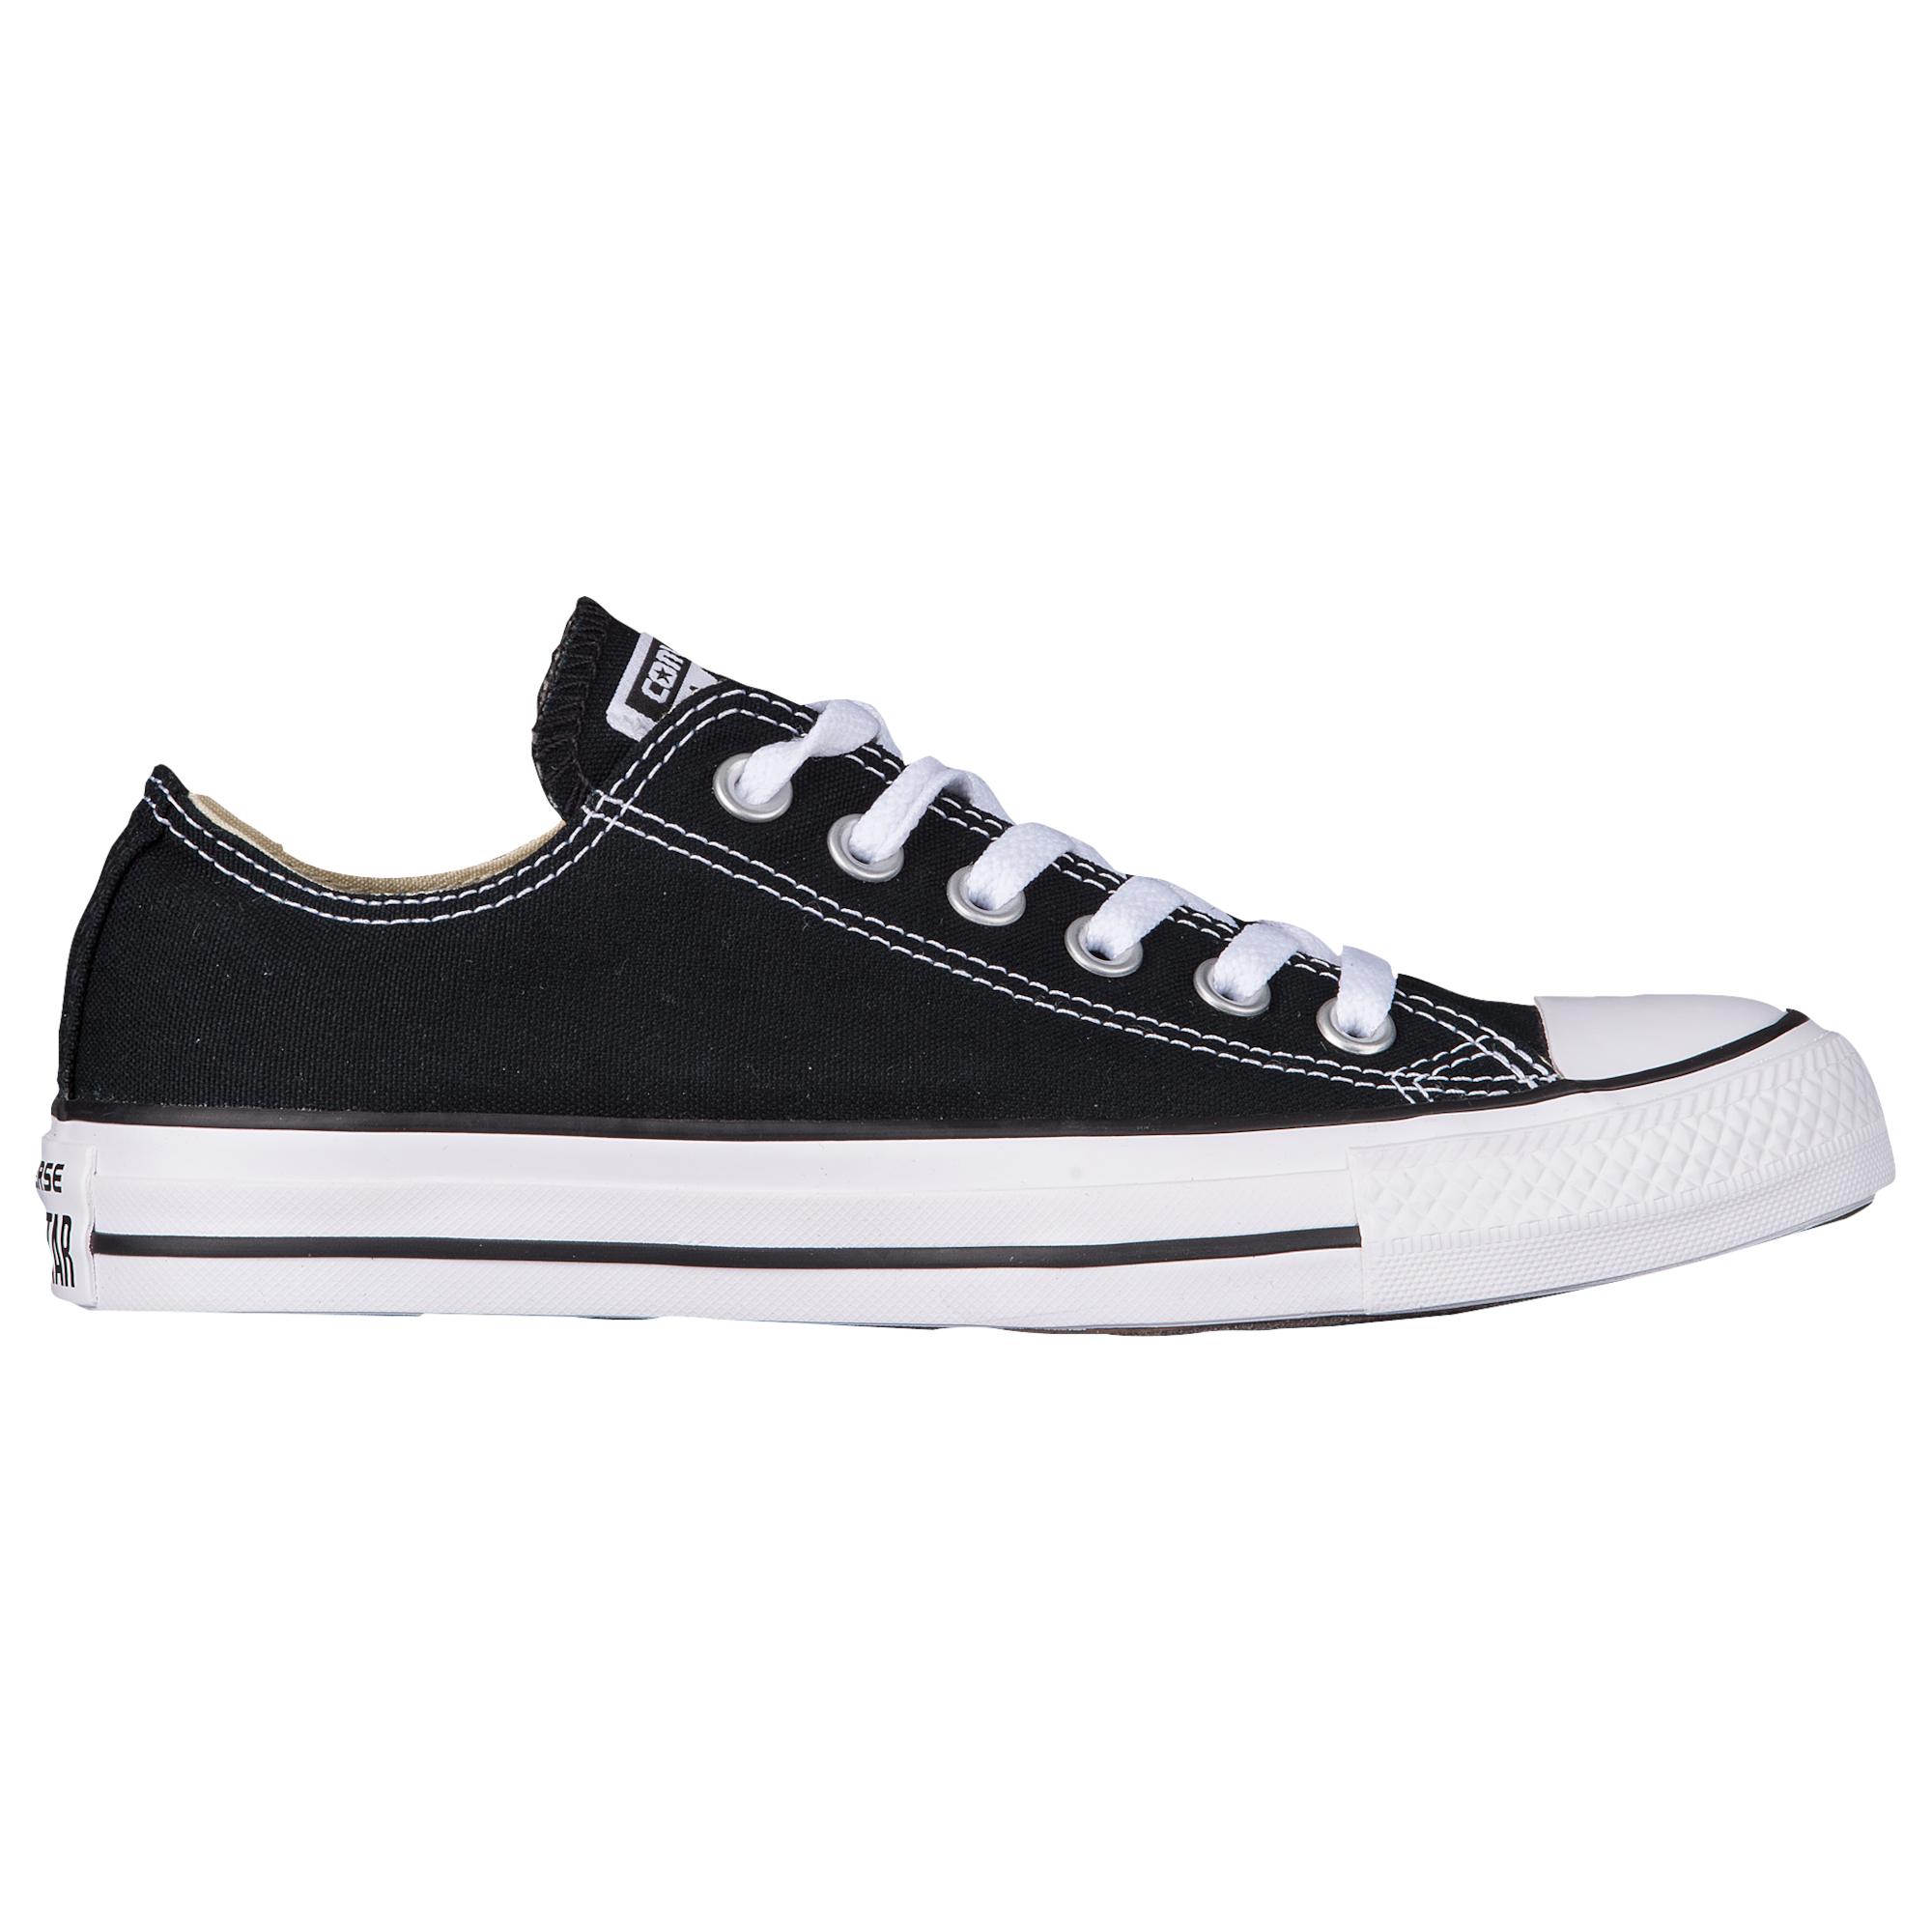 Converse Canvas All Star Ox Basketball Shoes in Black/White (Black) - Lyst